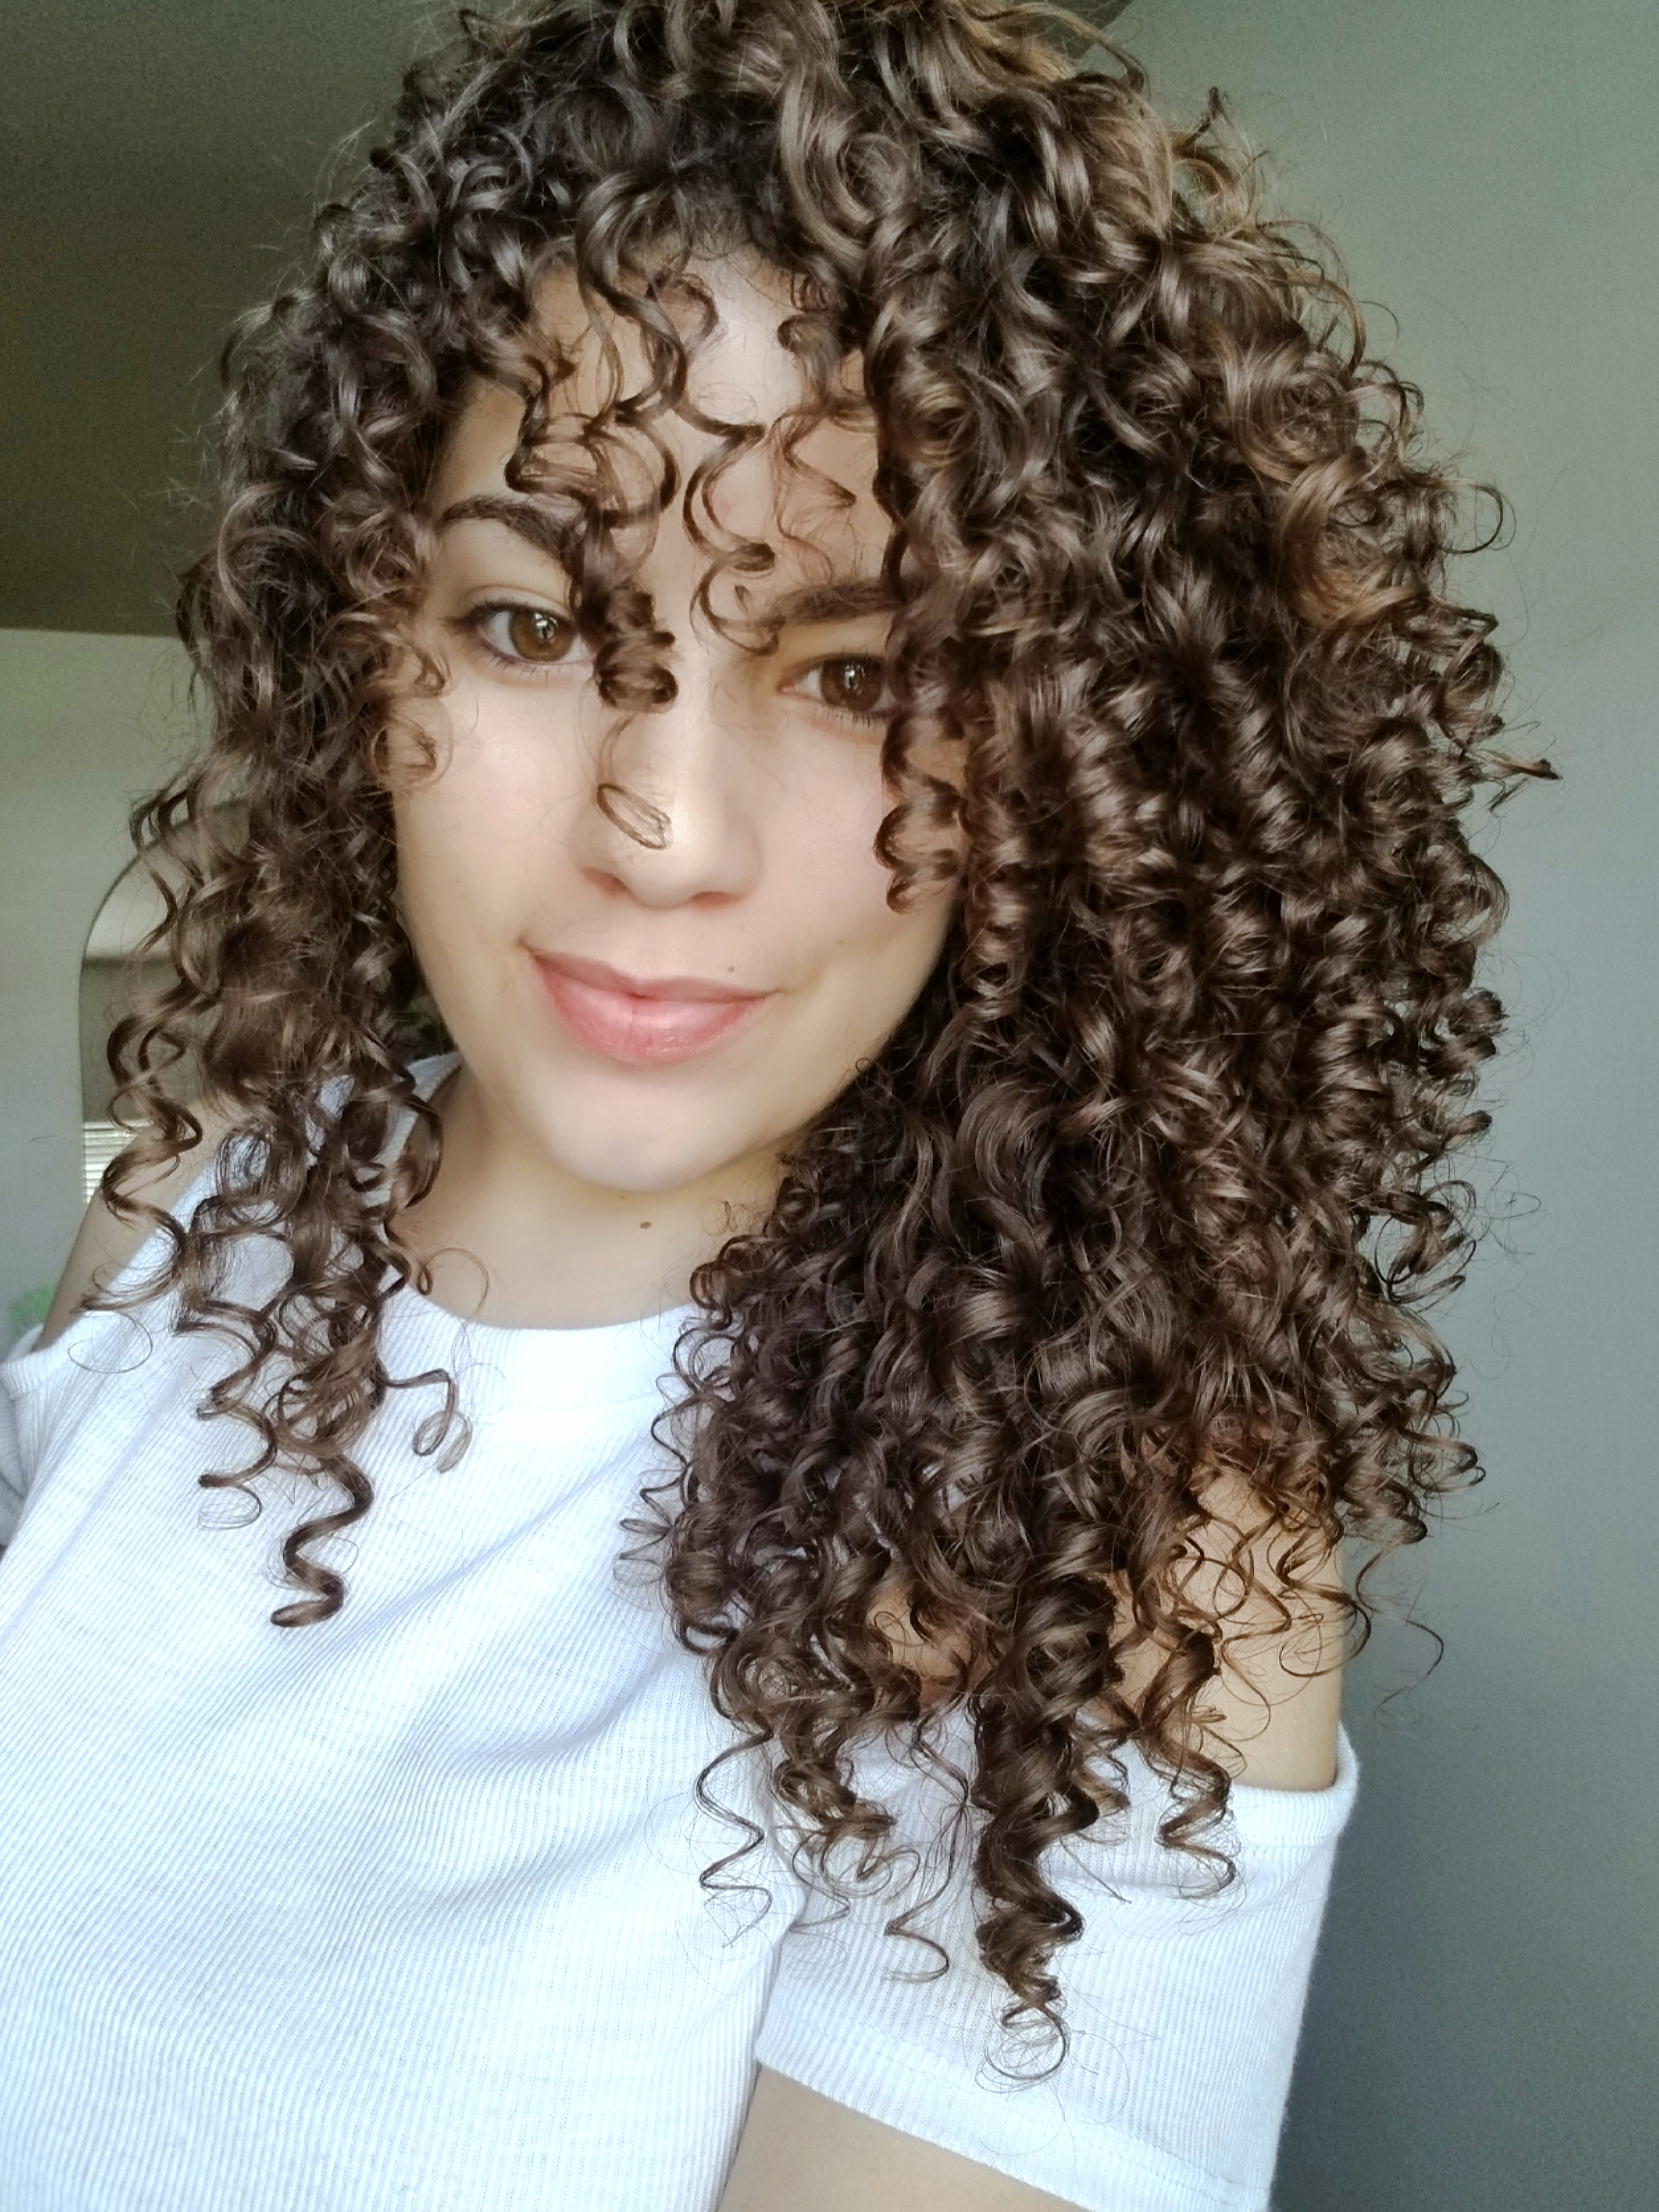 Texture Tales leslie.joannys Curly Girl Method Transformation